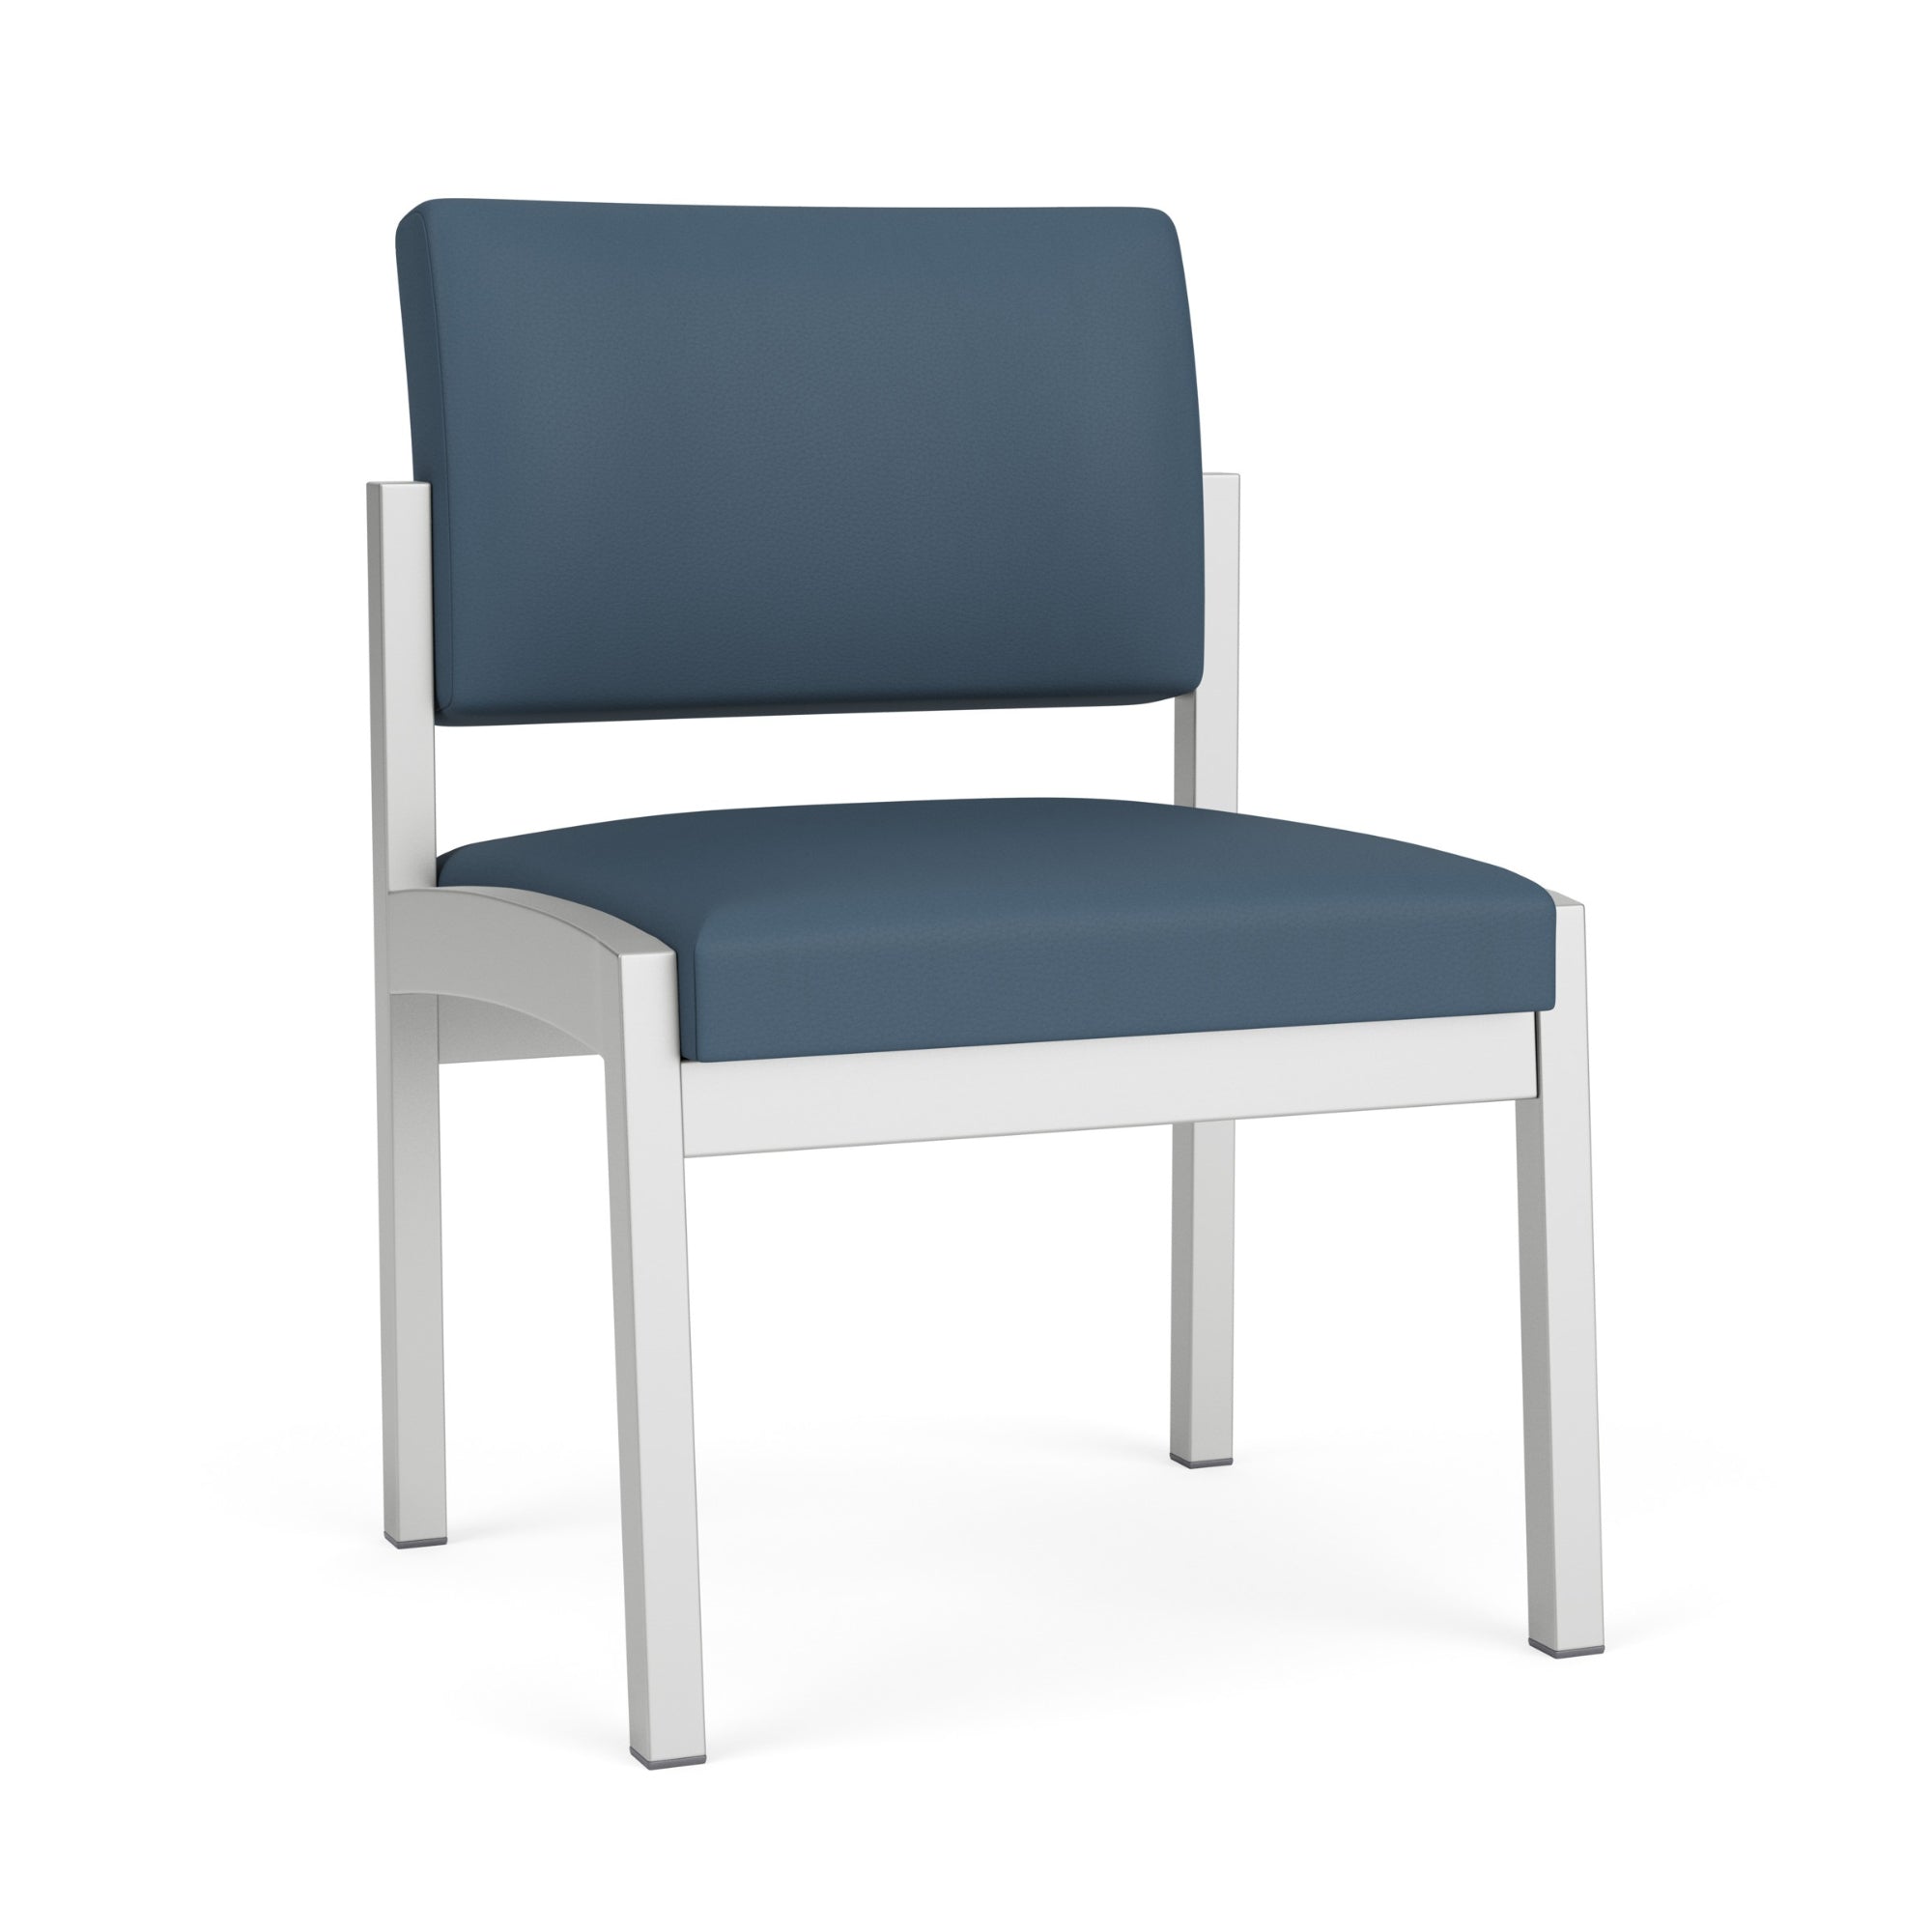 Lenox Steel Collection Reception Seating, Armless Guest Chair, Healthcare Vinyl Upholstery, FREE SHIPPING